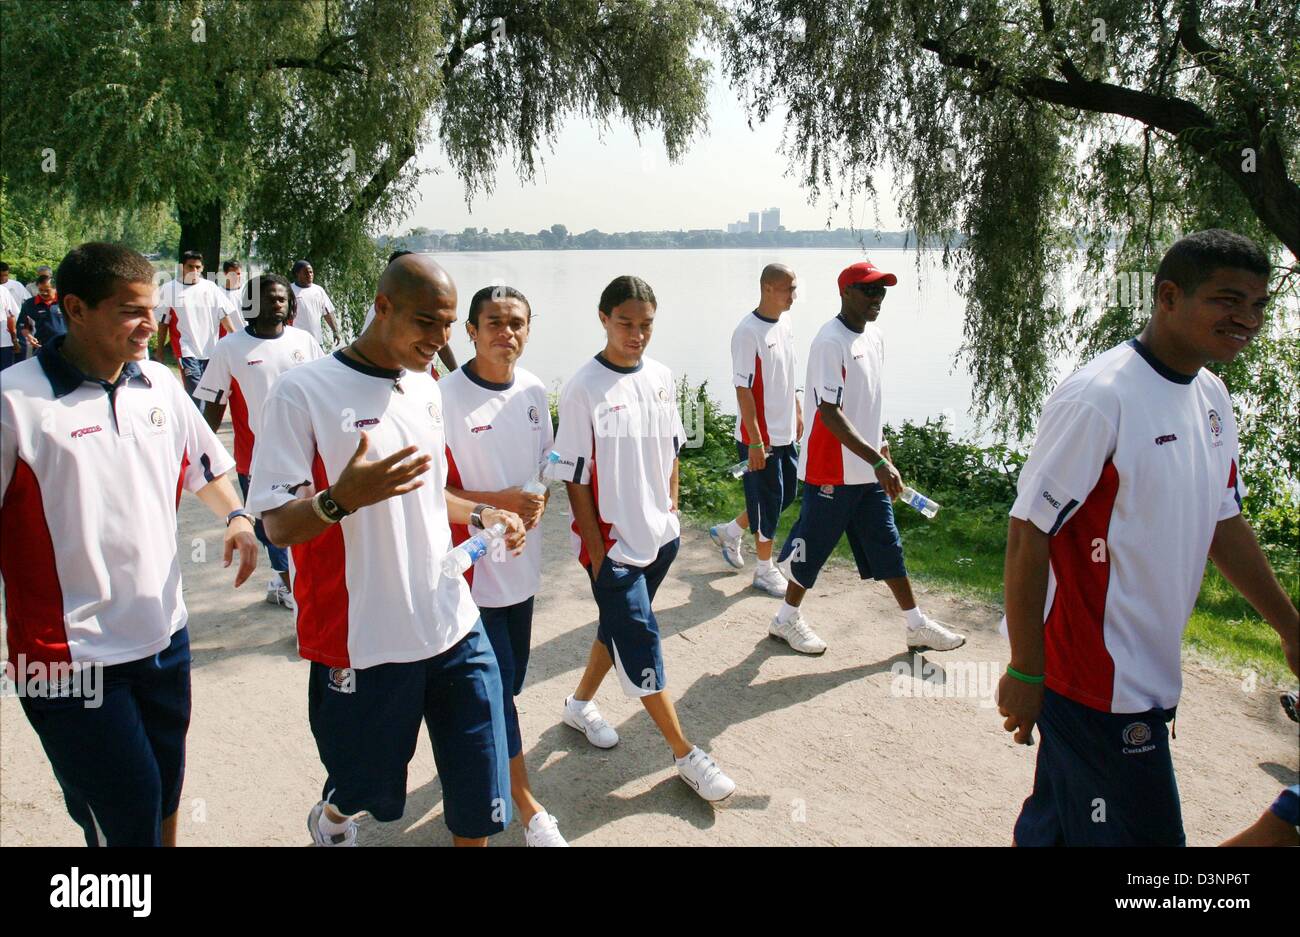 Players of the national soocer team of Costa Rica take a walk at the Alster in Hamburg, Germany, Wednesday, 14 June 2006. Costa Rica is preparing for the World Cup soccer match against Ecuador on Thursday, June 15th. Photo: Kay Nietfeld Stock Photo